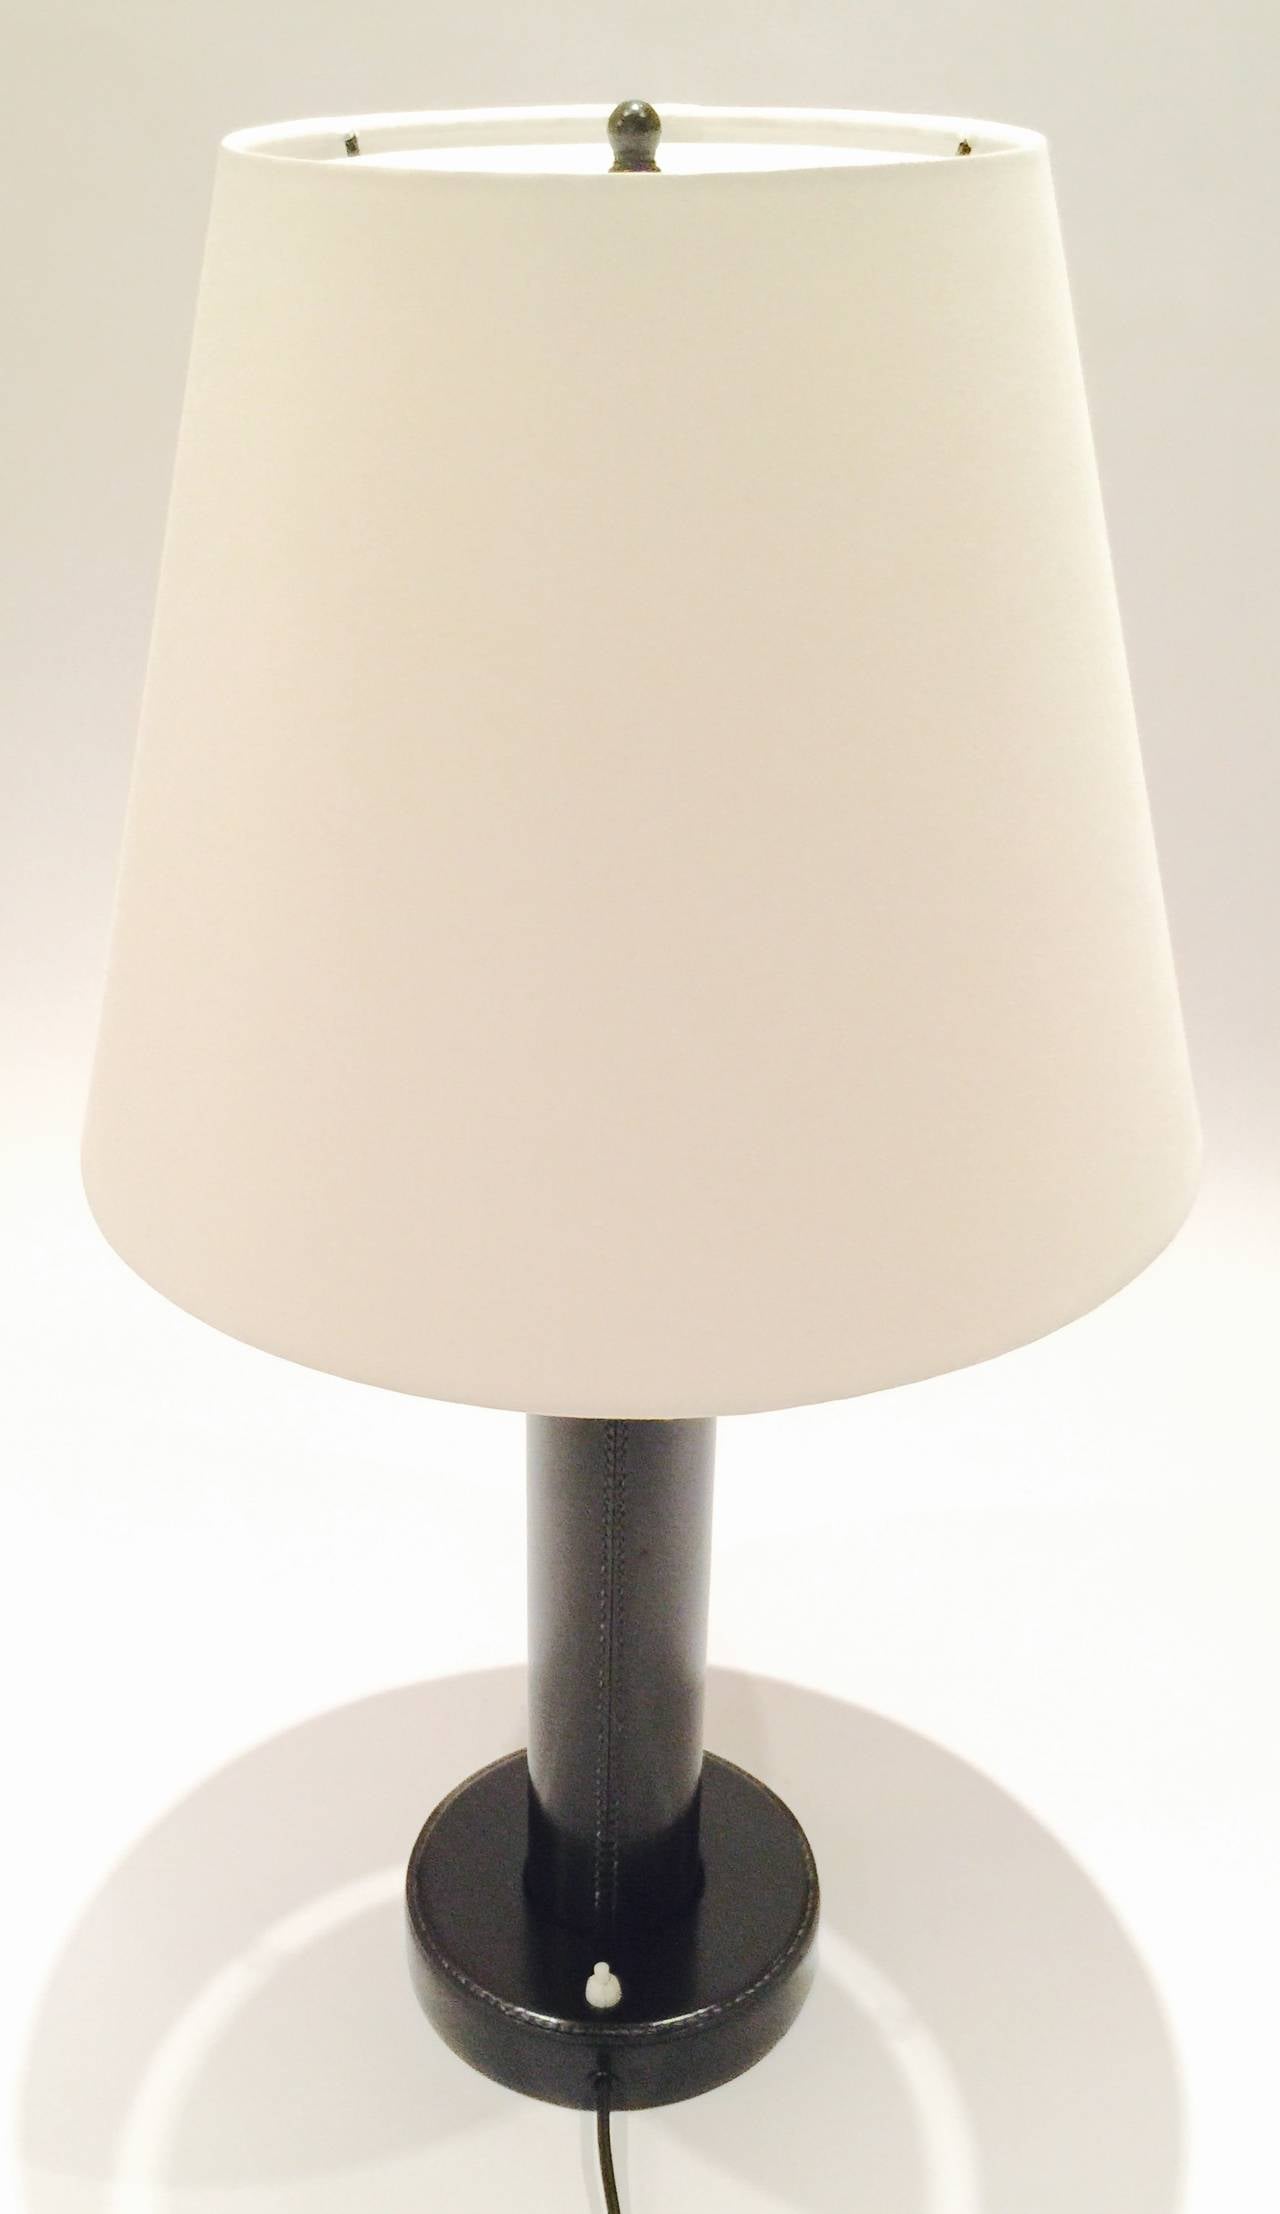 A Black Leather Lamp With Stitching Branded 'VENDEL.Graveur, Paris'.  Includes New Custom Shade As Pictured